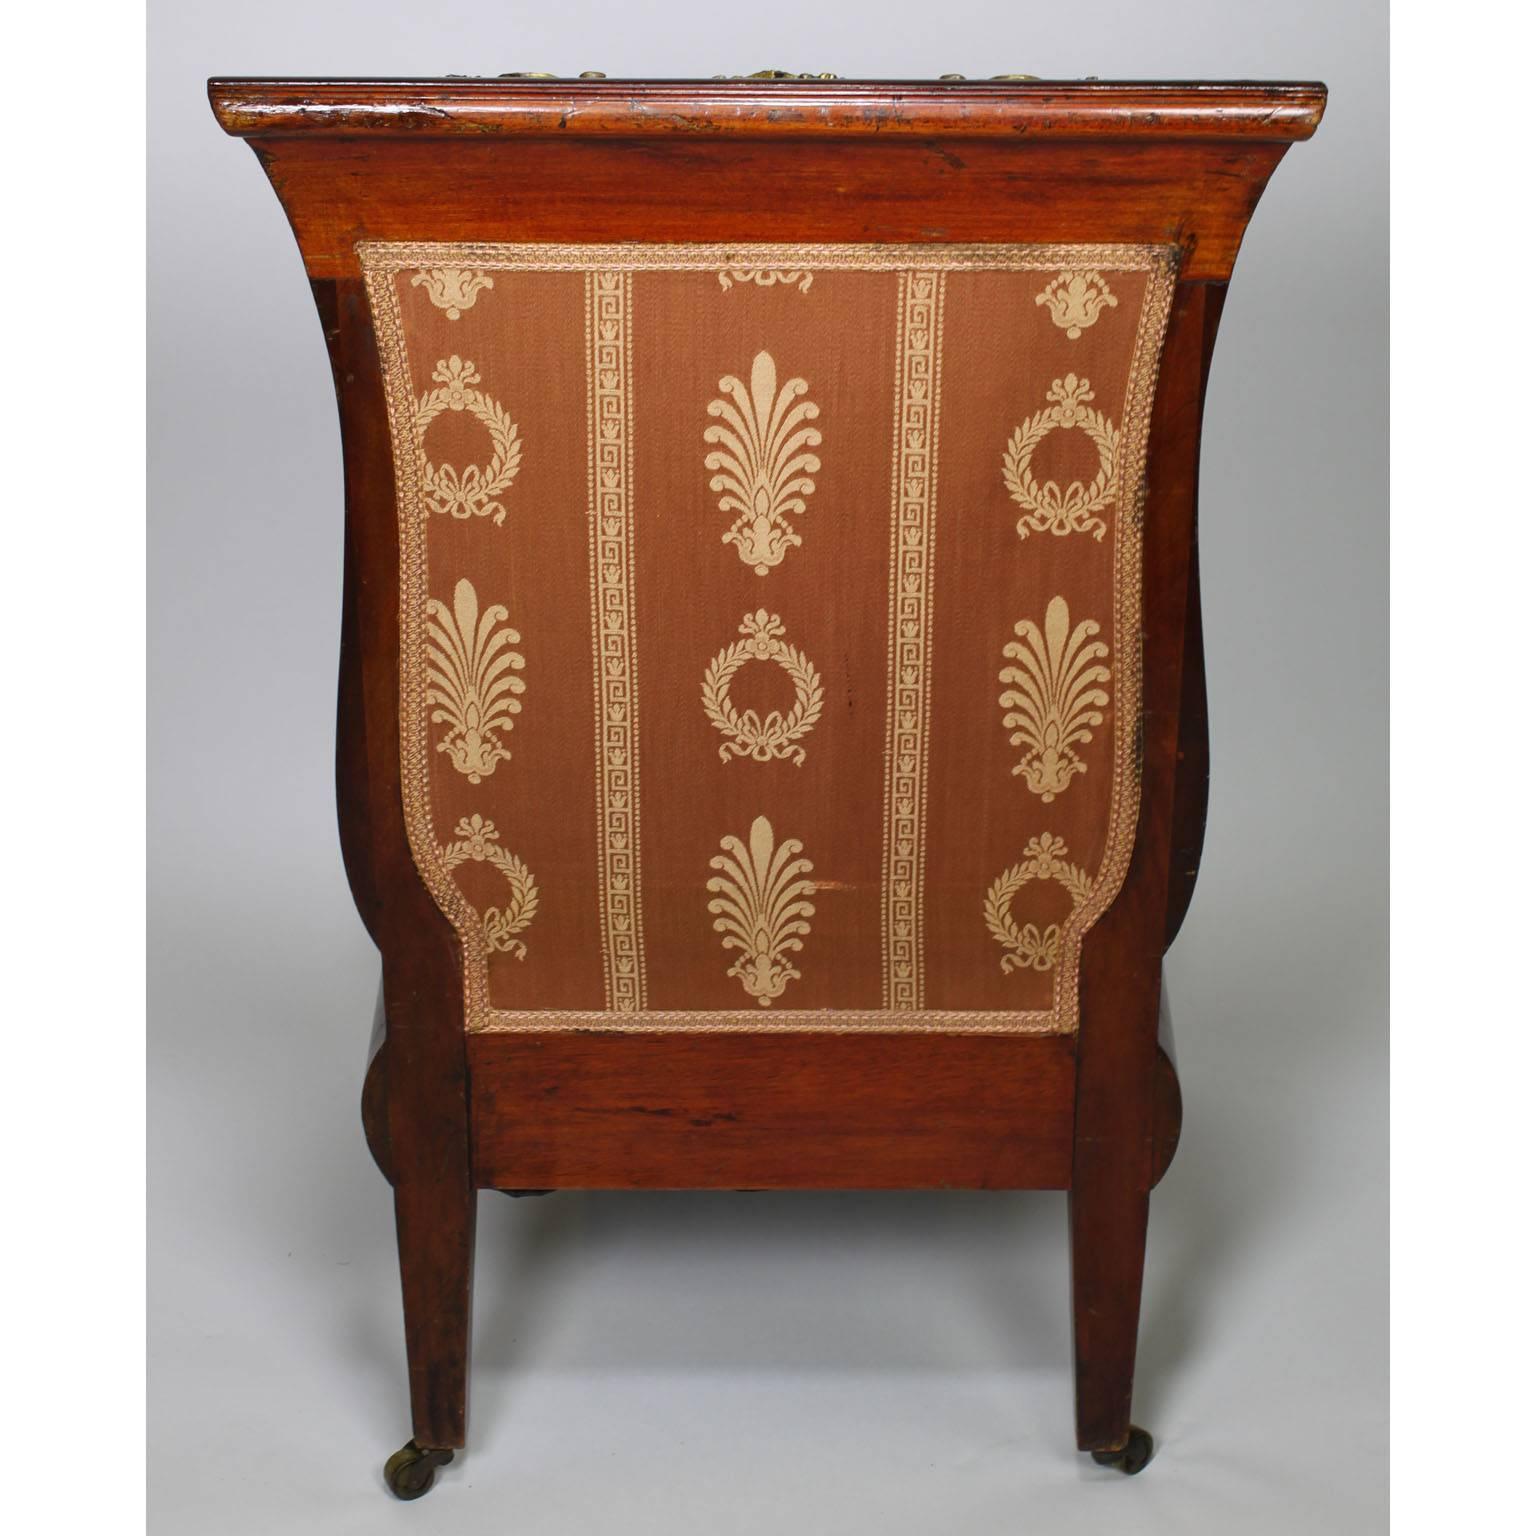 Fabric French Napoleon III Empire Mahogany and Ormolu-Mounted Low Chair, after Thomire